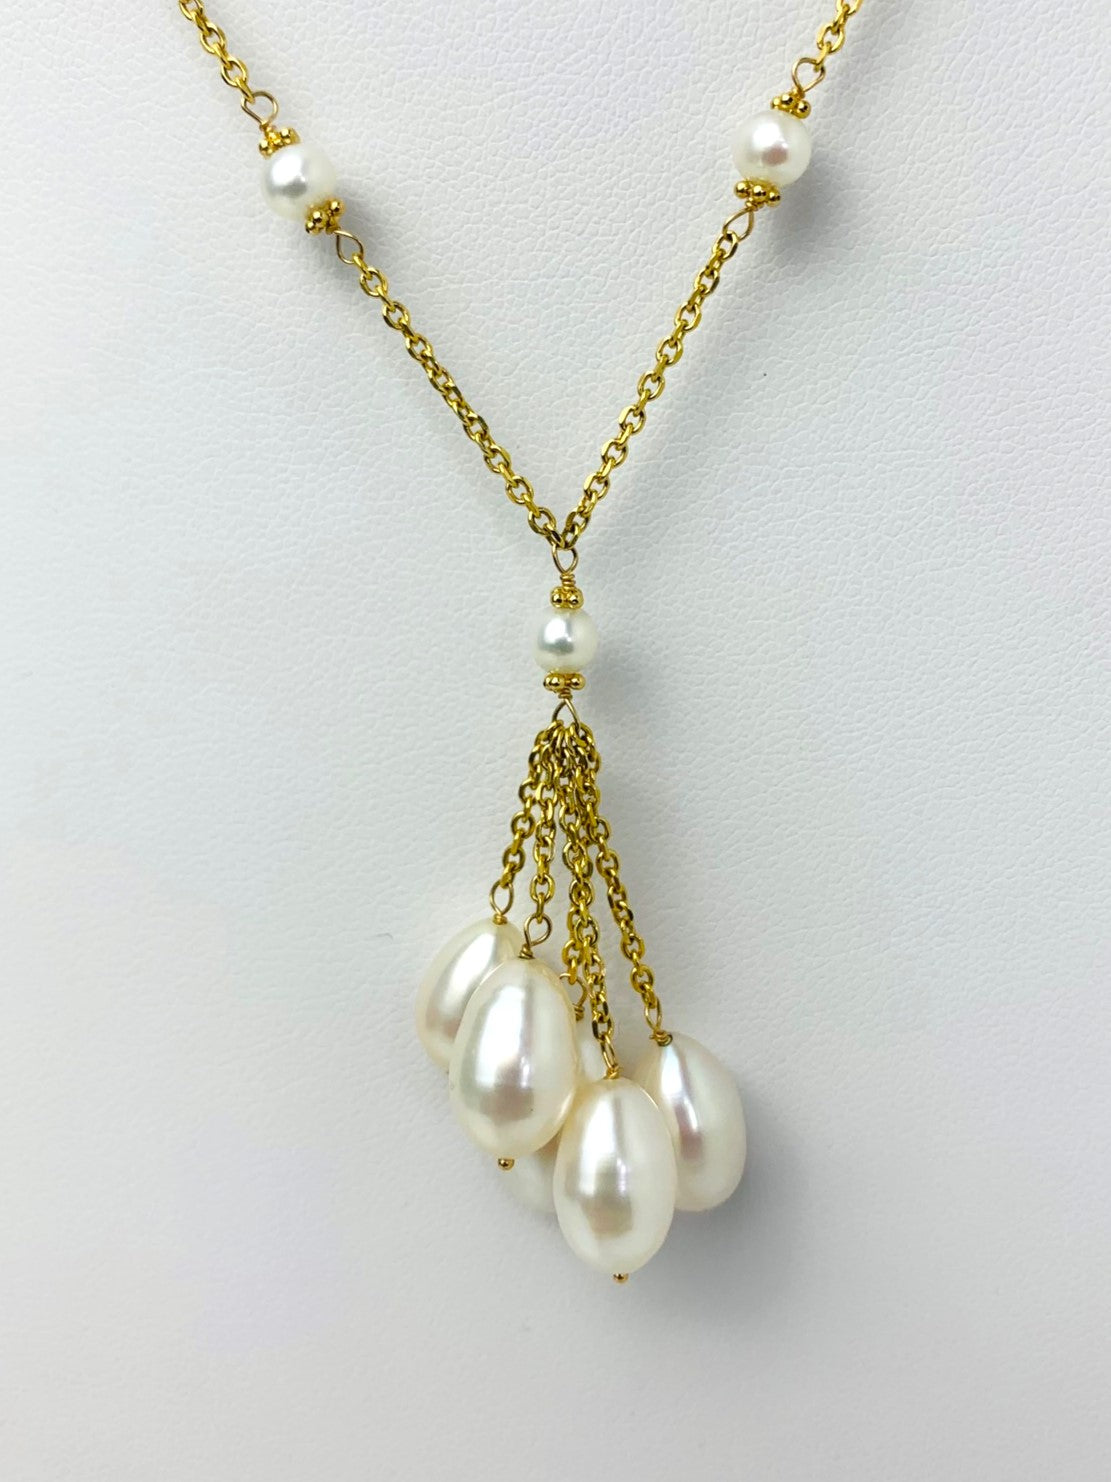 16.5"-17.5" Pearl Station Necklace With Tassel Center in 14KY - NCK-511-TASPRL14Y-WH-17.5